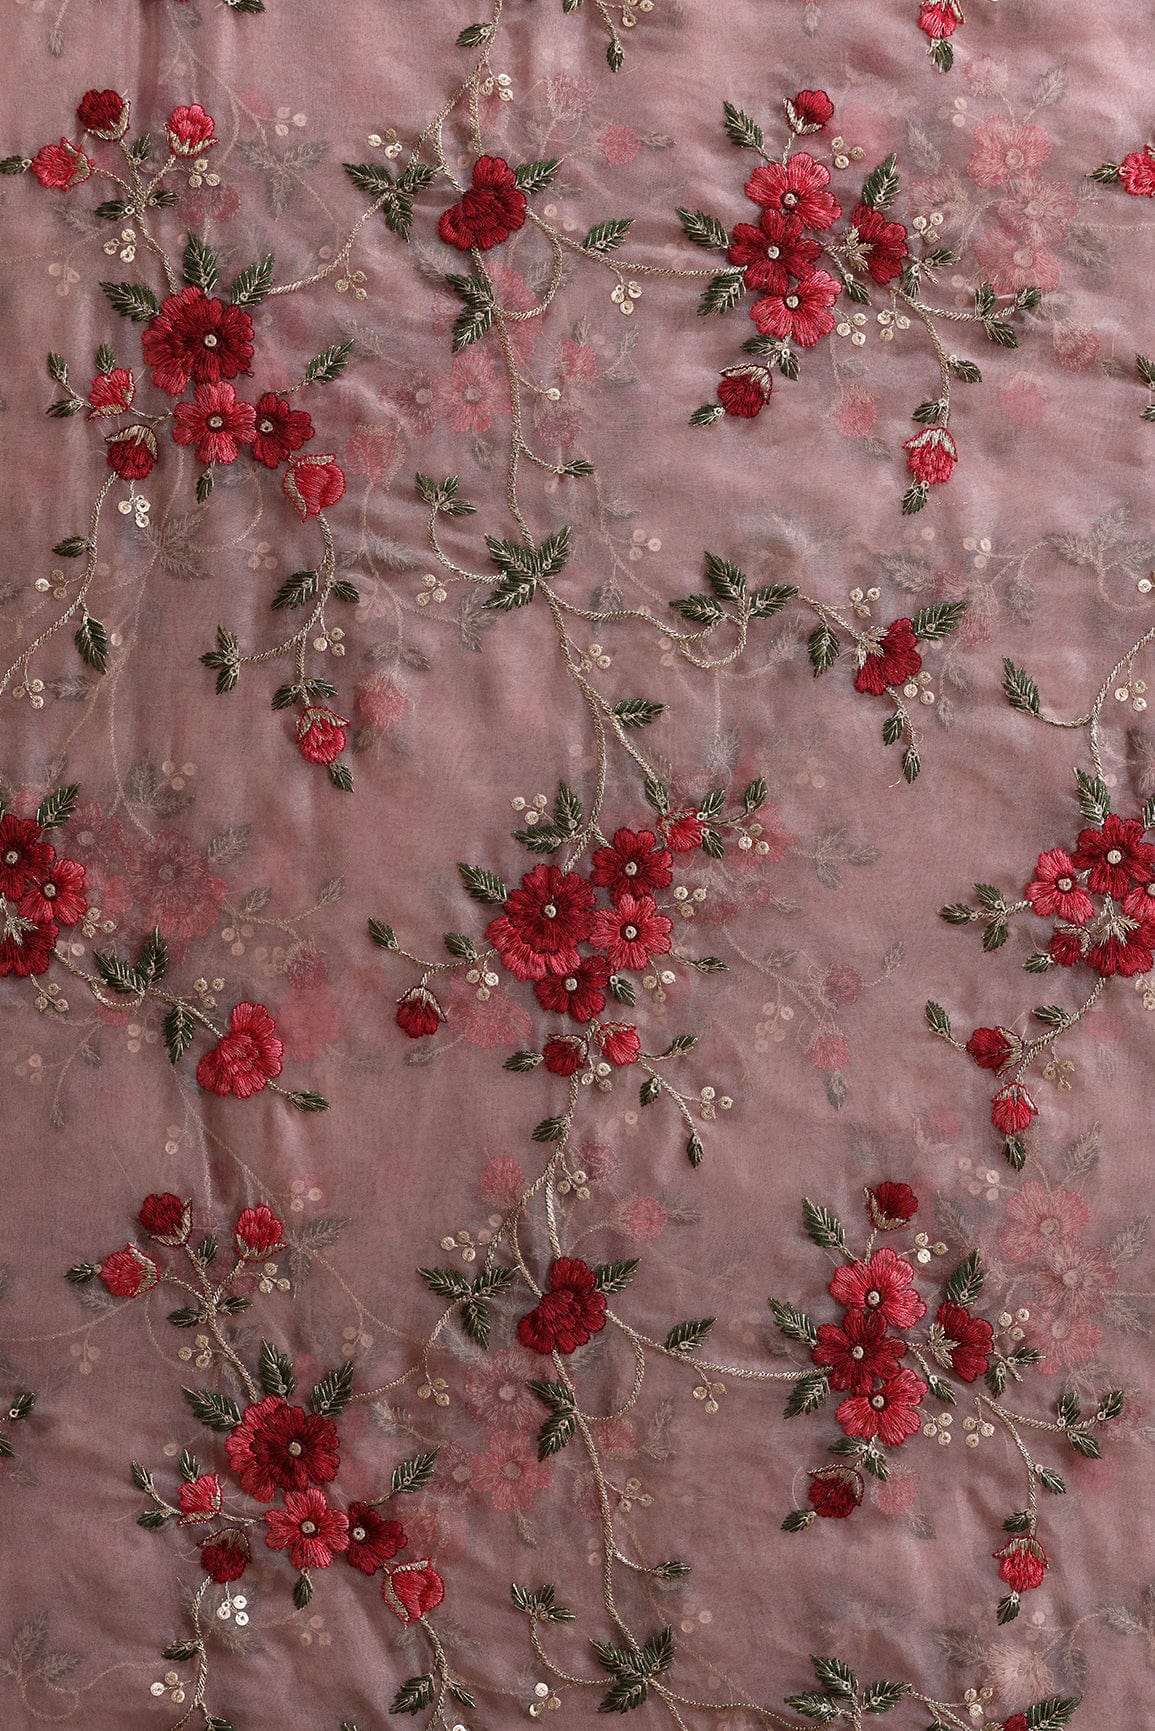 doeraa Embroidery Fabrics Multi Color Thread Floral Embroidery Work On Salmon Pink Organza Fabric